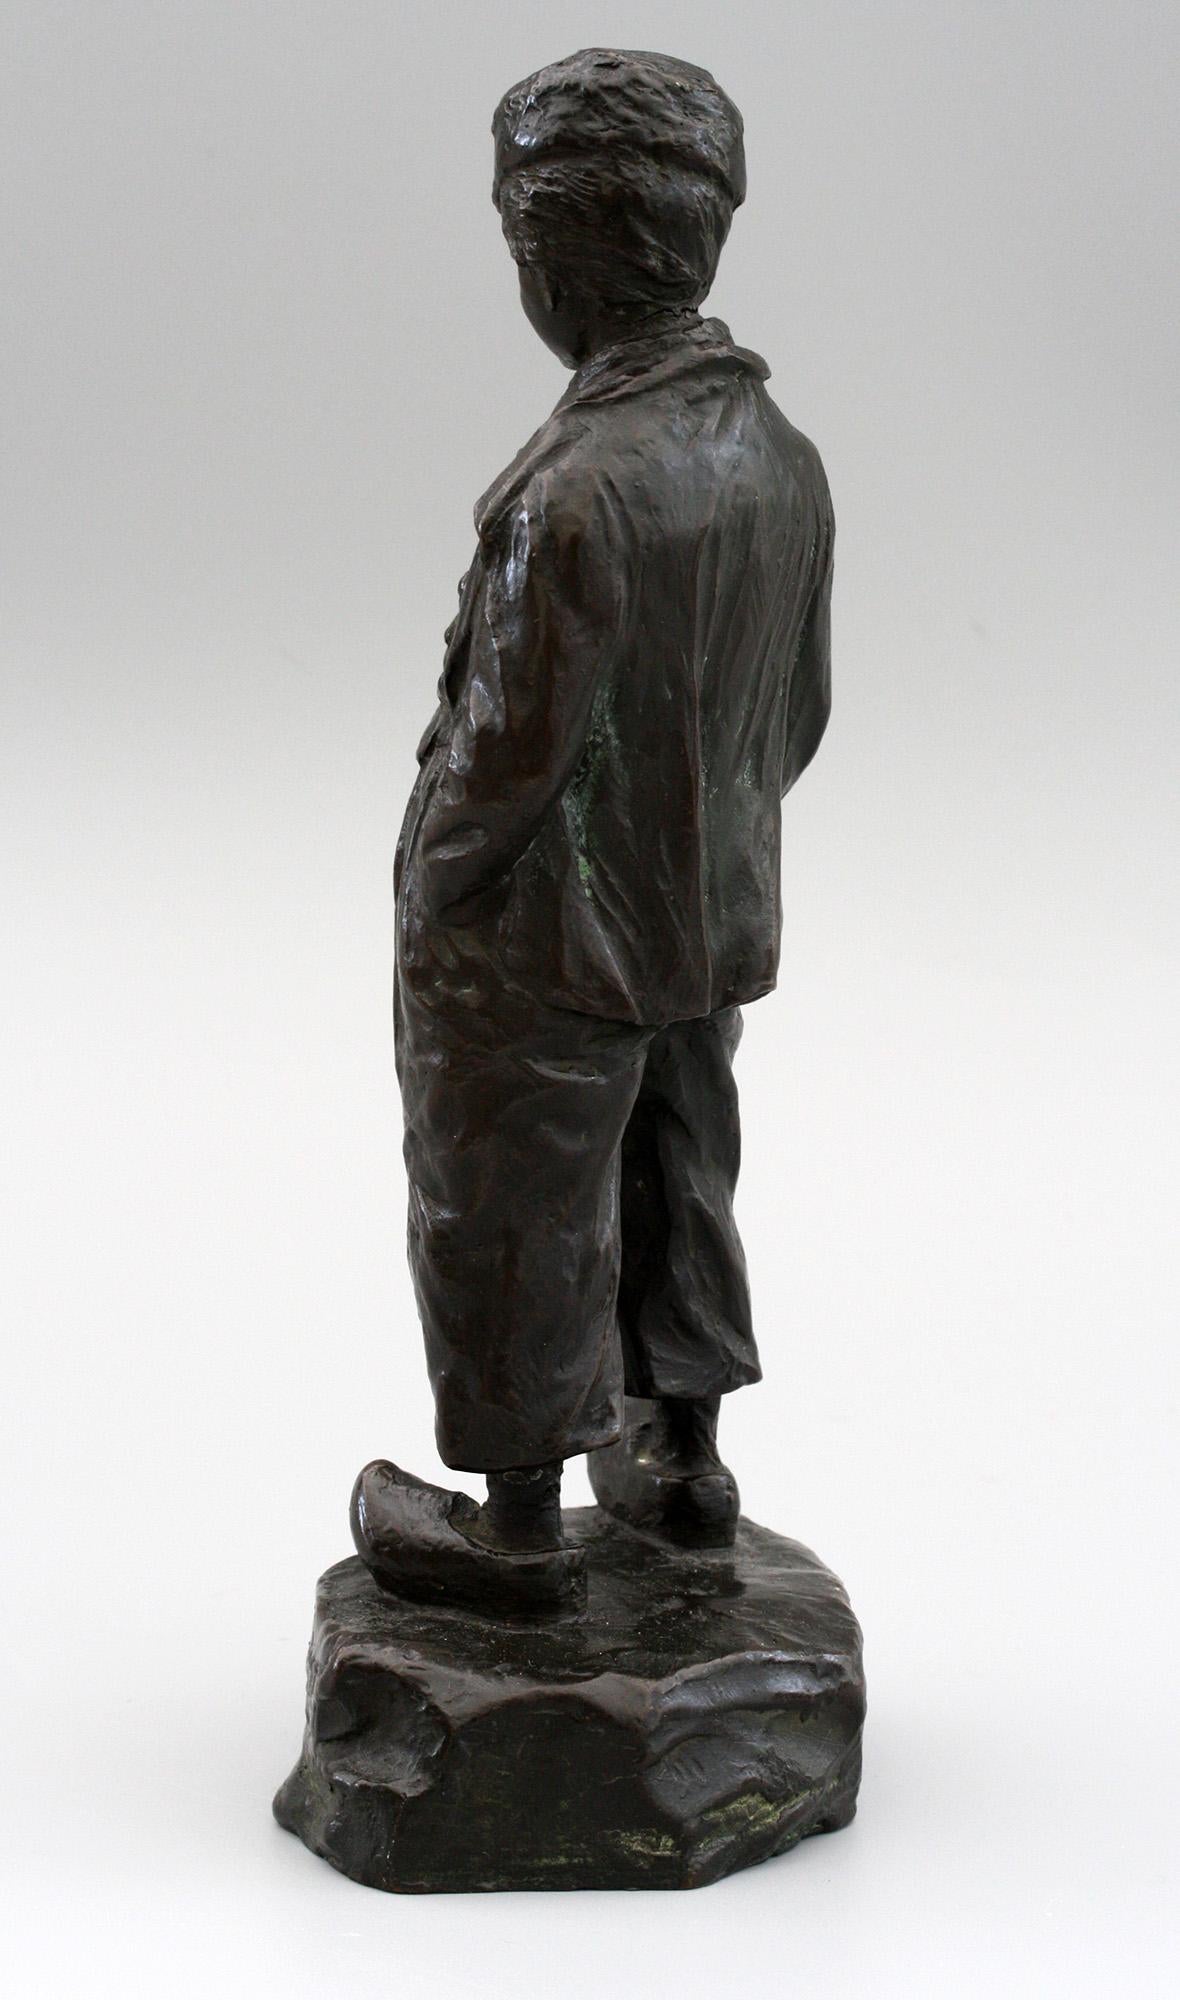 A very stylish and well sculpted bronze figure of a Cossack wearing clogs by renowned Polish sculptor Paul Ludwig Kowalczewski (1865-1910) dating from circa 1890. The sculpture is cast depicting a man in traditional costume and wearing a fur hat